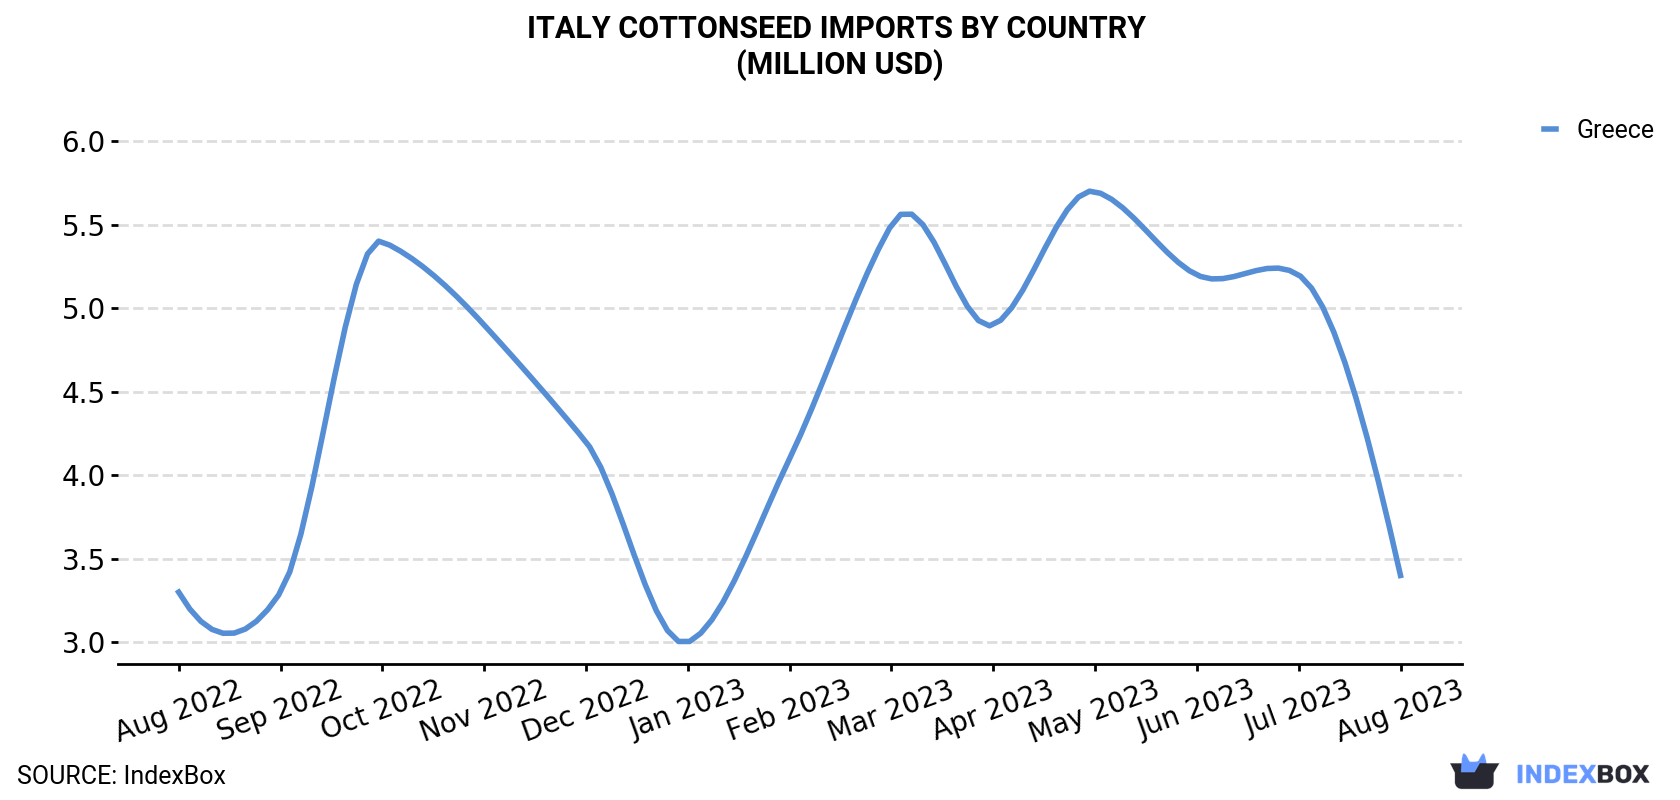 Italy Cottonseed Imports By Country (Million USD)